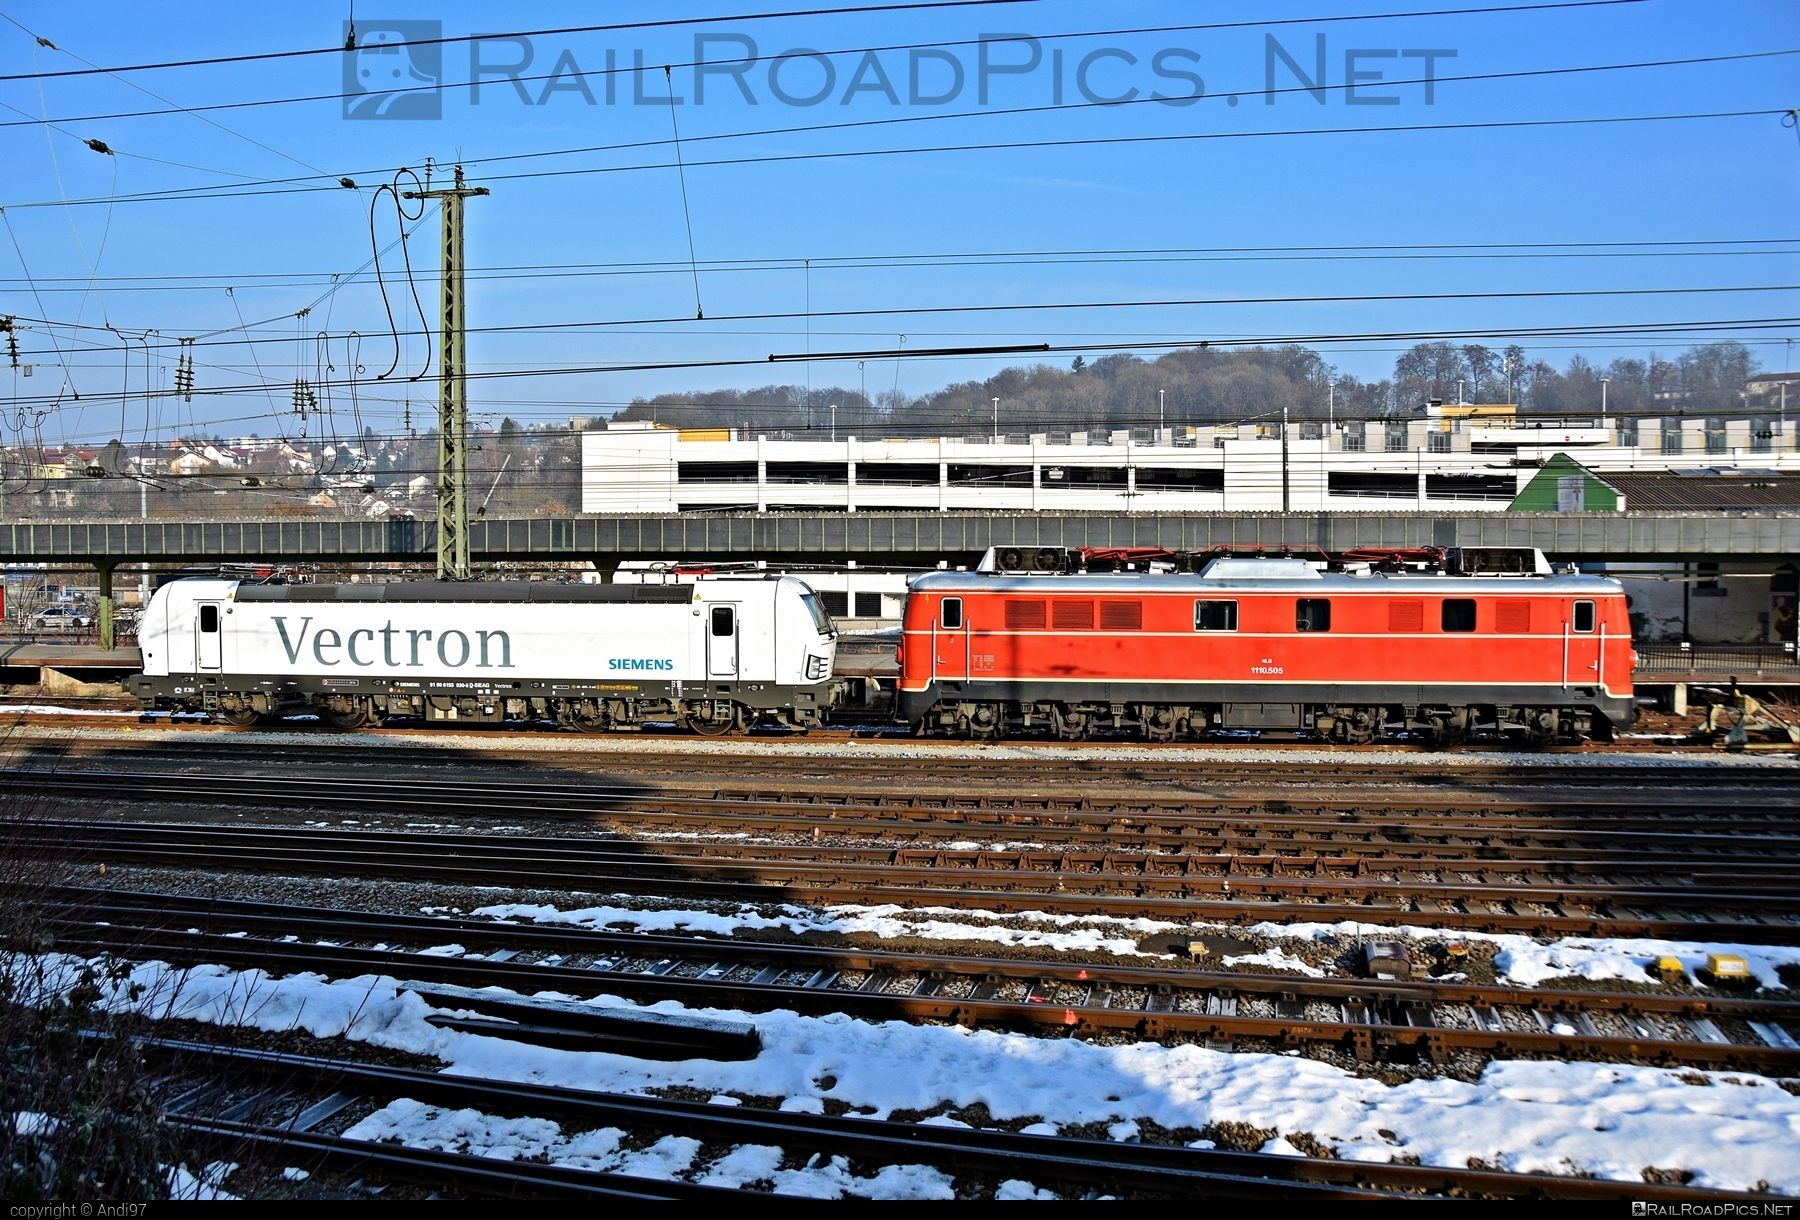 Siemens Vectron AC DPM - 193 930 operated by Siemens Mobility GmbH #SiemensMobility #SiemensMobilityGmbH #sieag #siemens #siemensVectron #siemensVectronACDPM #vectron #vectronACDPM